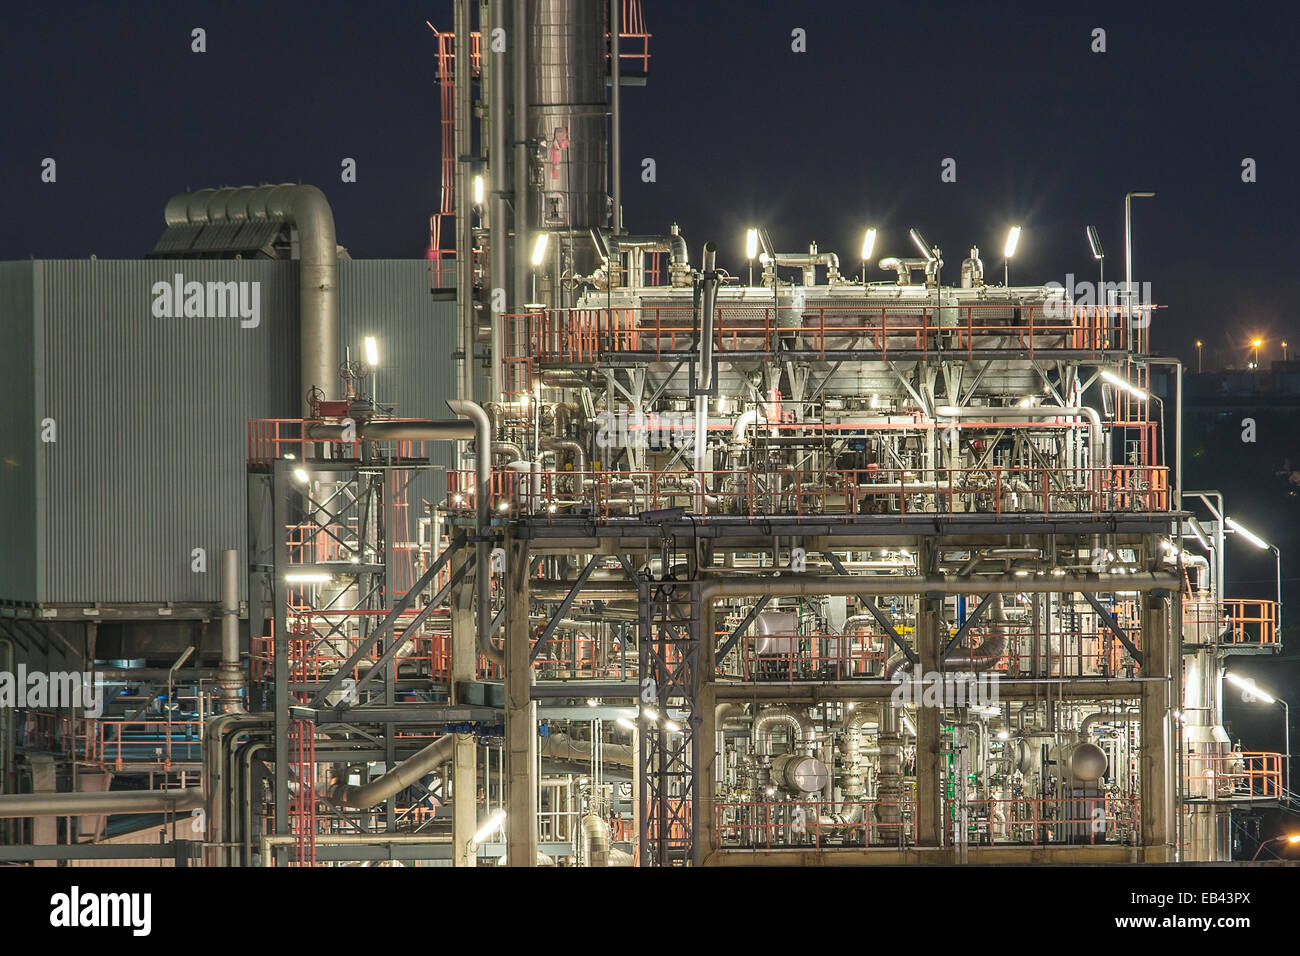 Lighting from structure of oil and chemical factory Stock Photo